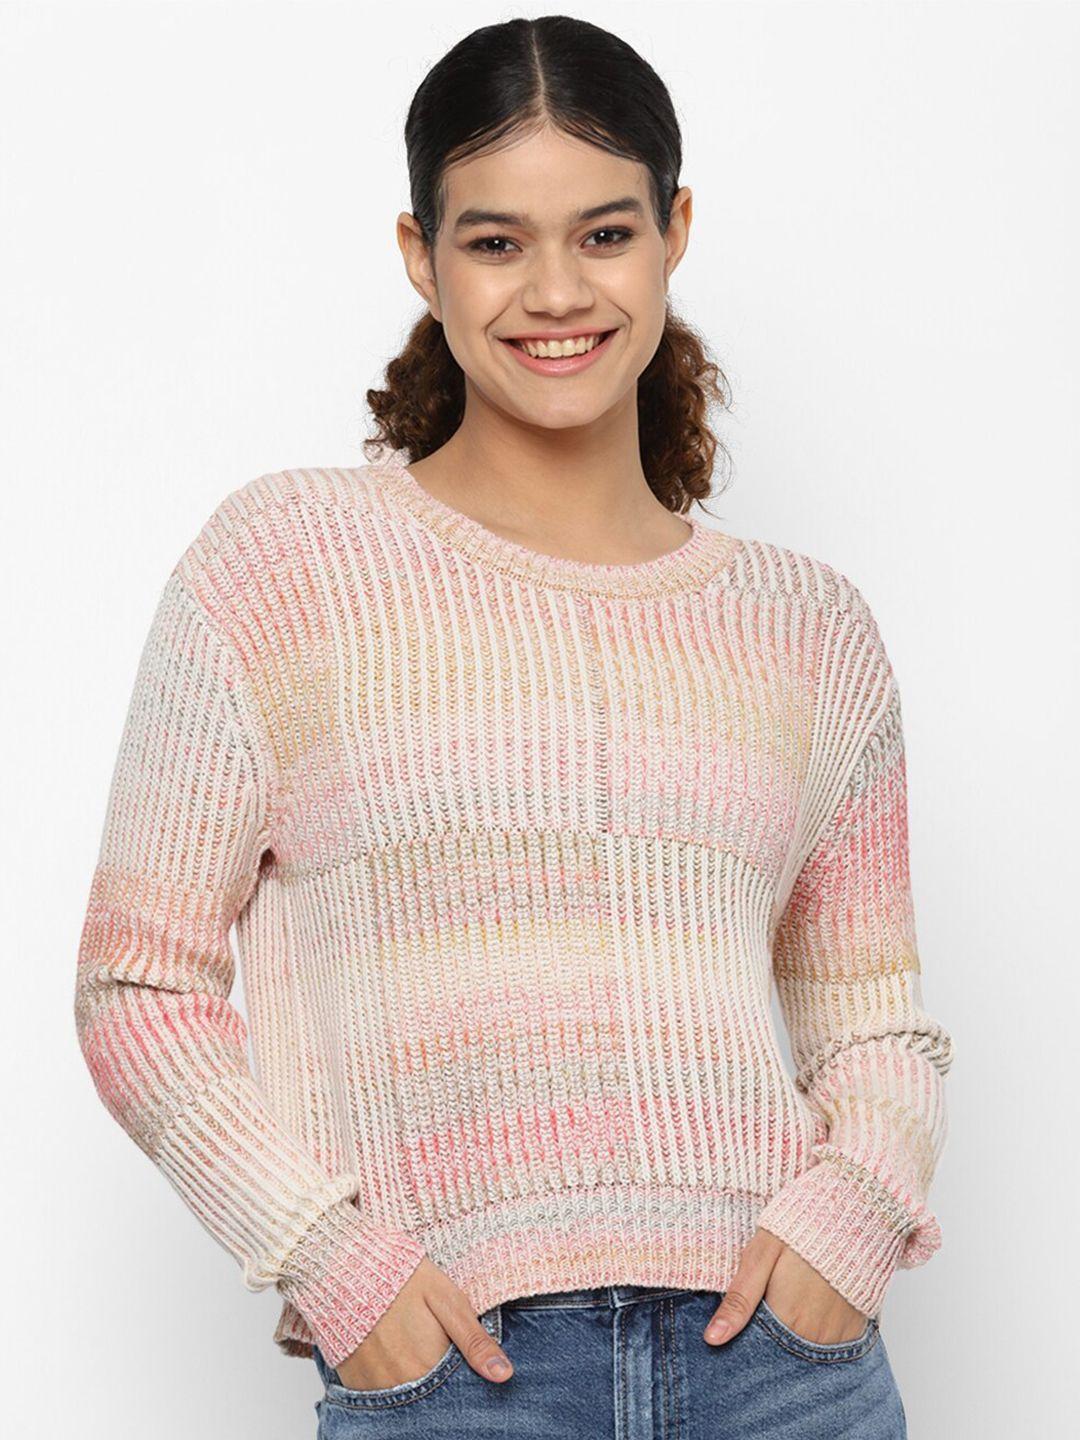 american-eagle-outfitters-women-cream-coloured-&-pink-cable-knit-pullover-sweater